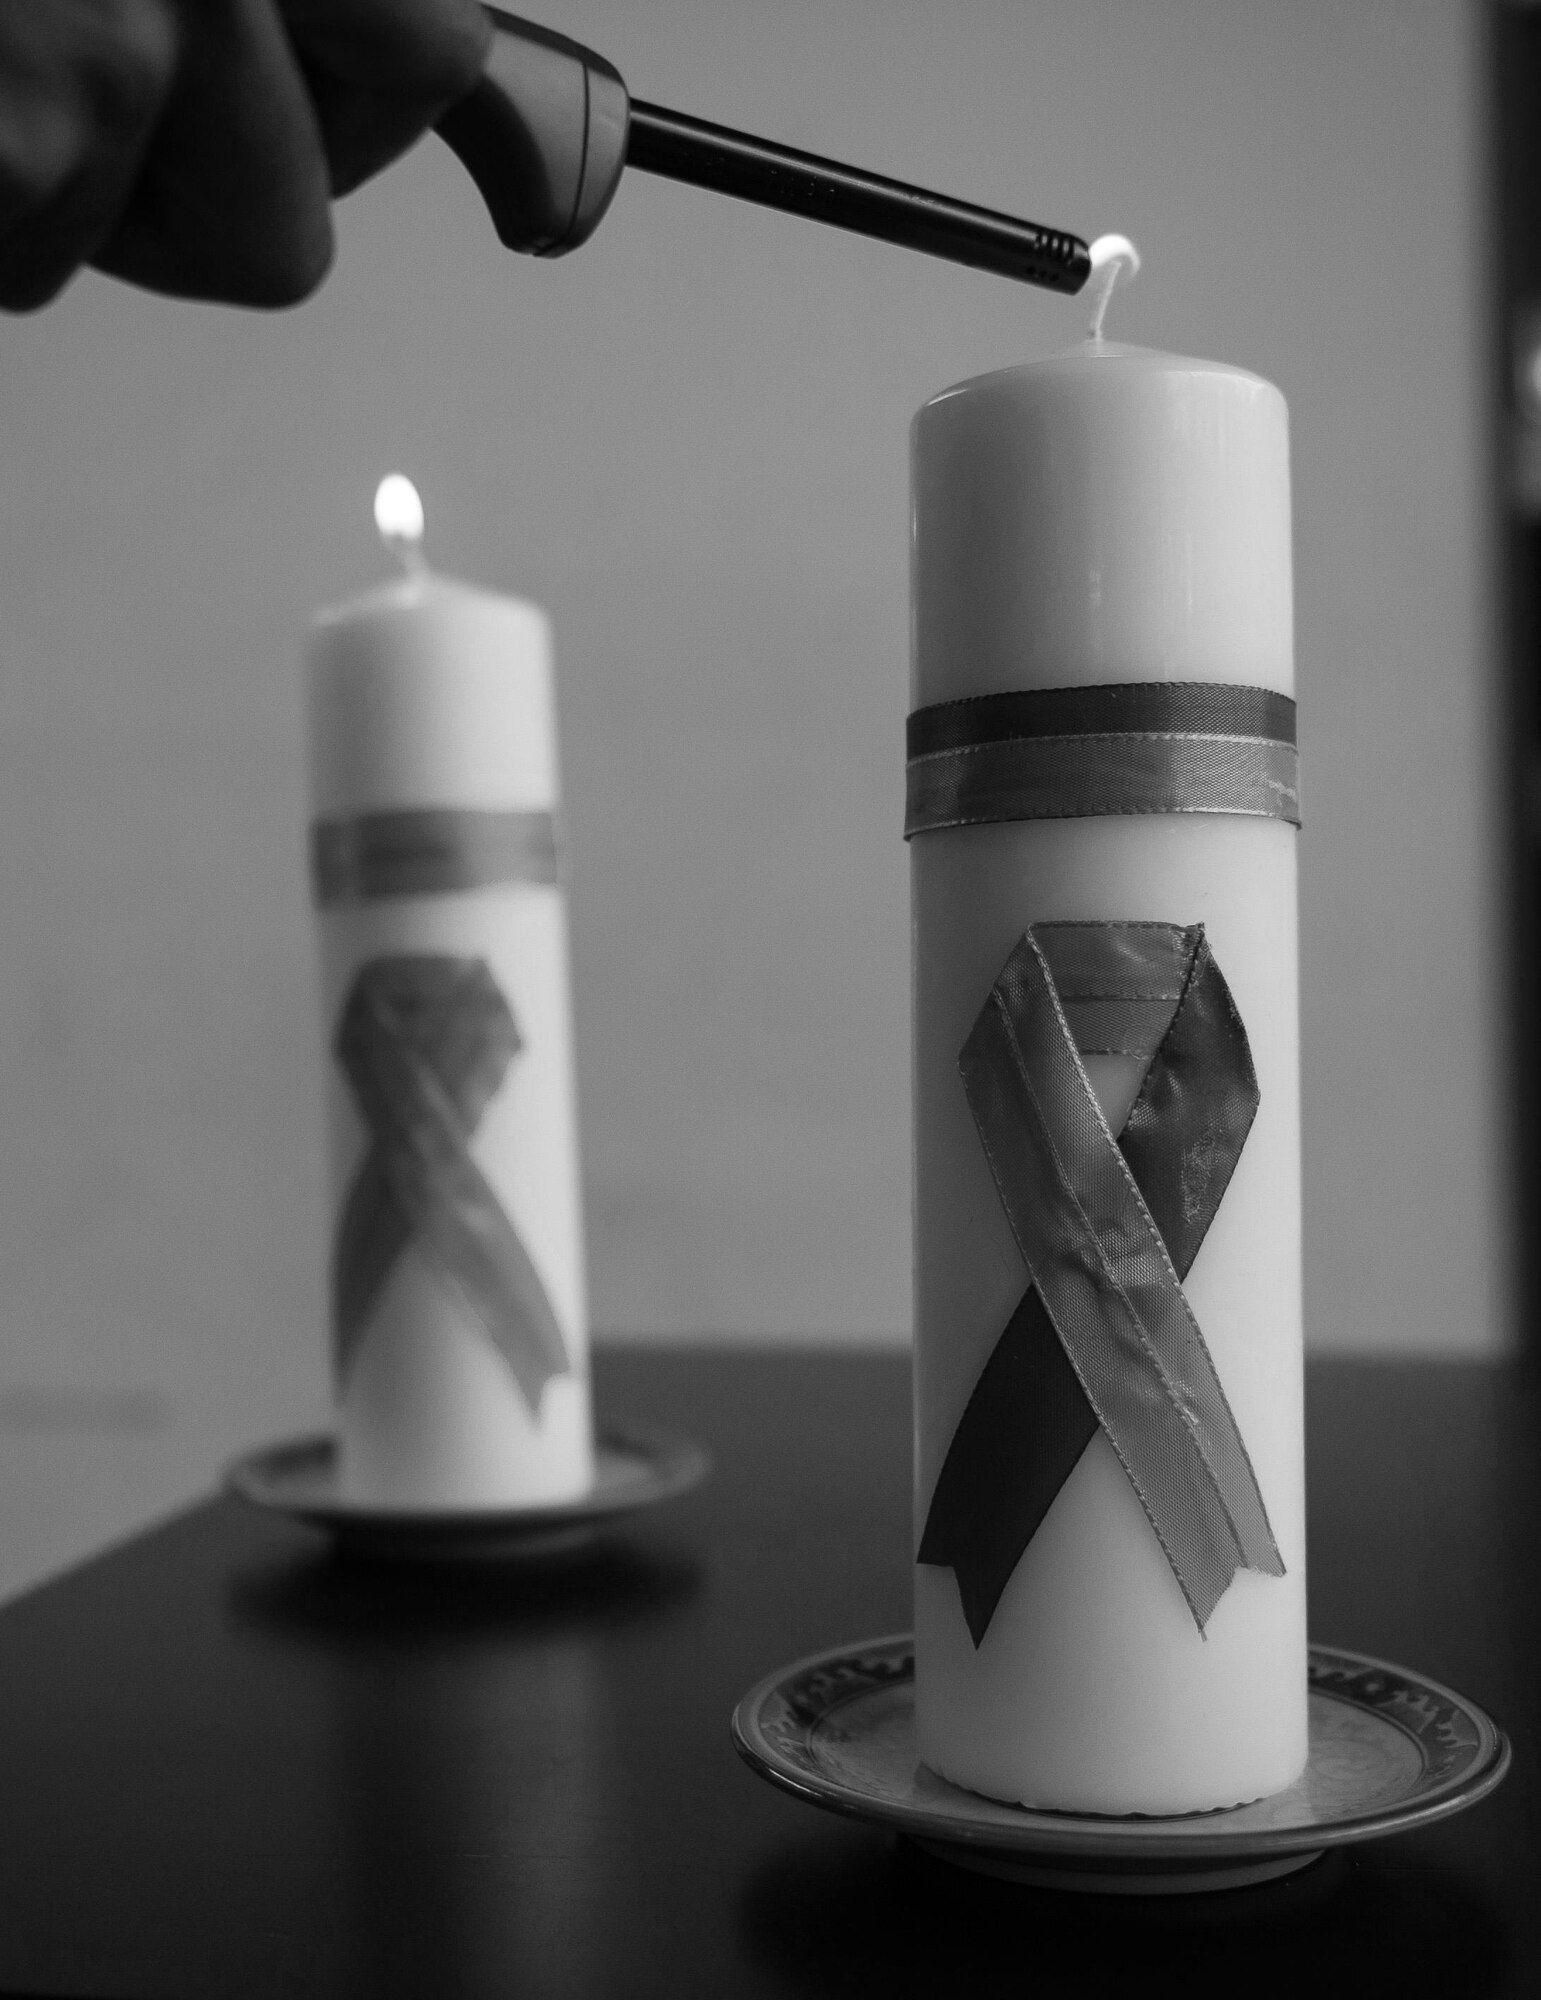 Candles are lit to remember the victims of interpersonal violence at a candlelight vigil at Ramstein Air Base, Germany, Oct. 27, 2016. Each candle is marked with different-colored ribbons, representing the four categories that interpersonal violence covers: domestic violence, sexual abuse, child abuse, and bullying. According to the Center for Disease Control and Prevention, over the course of a year more than 10 million U.S. citizens are victims of interpersonal violence. The devastating physical, emotional, and psychological consequences of these events can cross generations and last lifetimes. (U.S. Air Force photo by Airman 1st Class Lane T. Plummer)